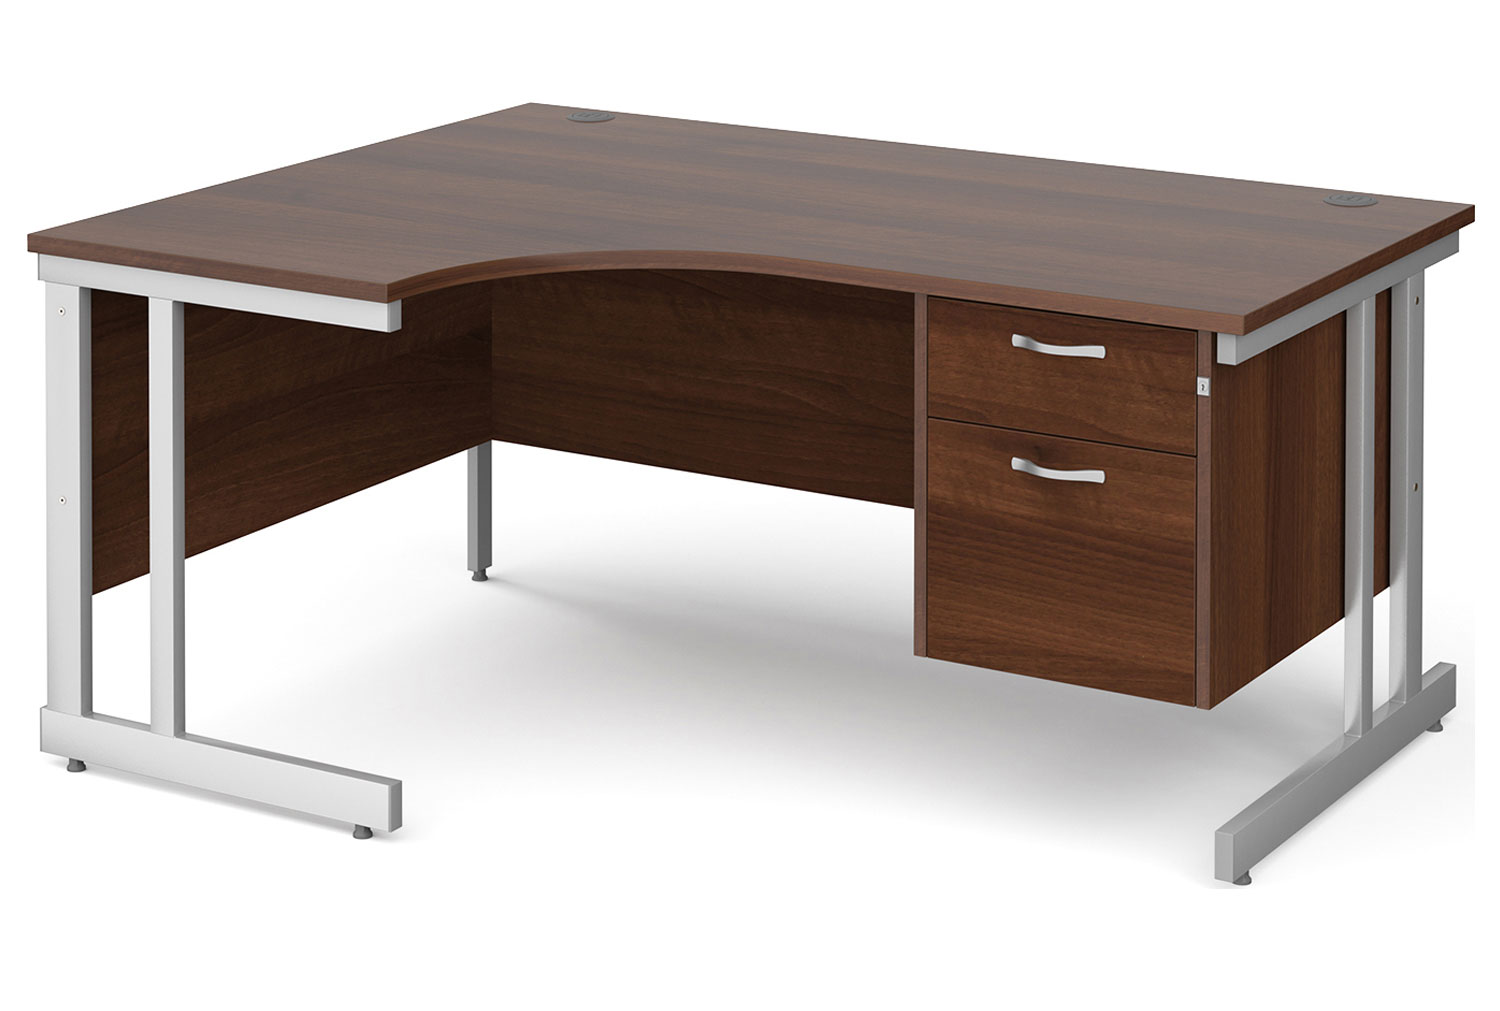 All Walnut Double C-Leg Left Hand Ergo Office Desk 2 Drawers, 160wx120/80dx73h (cm), Express Delivery